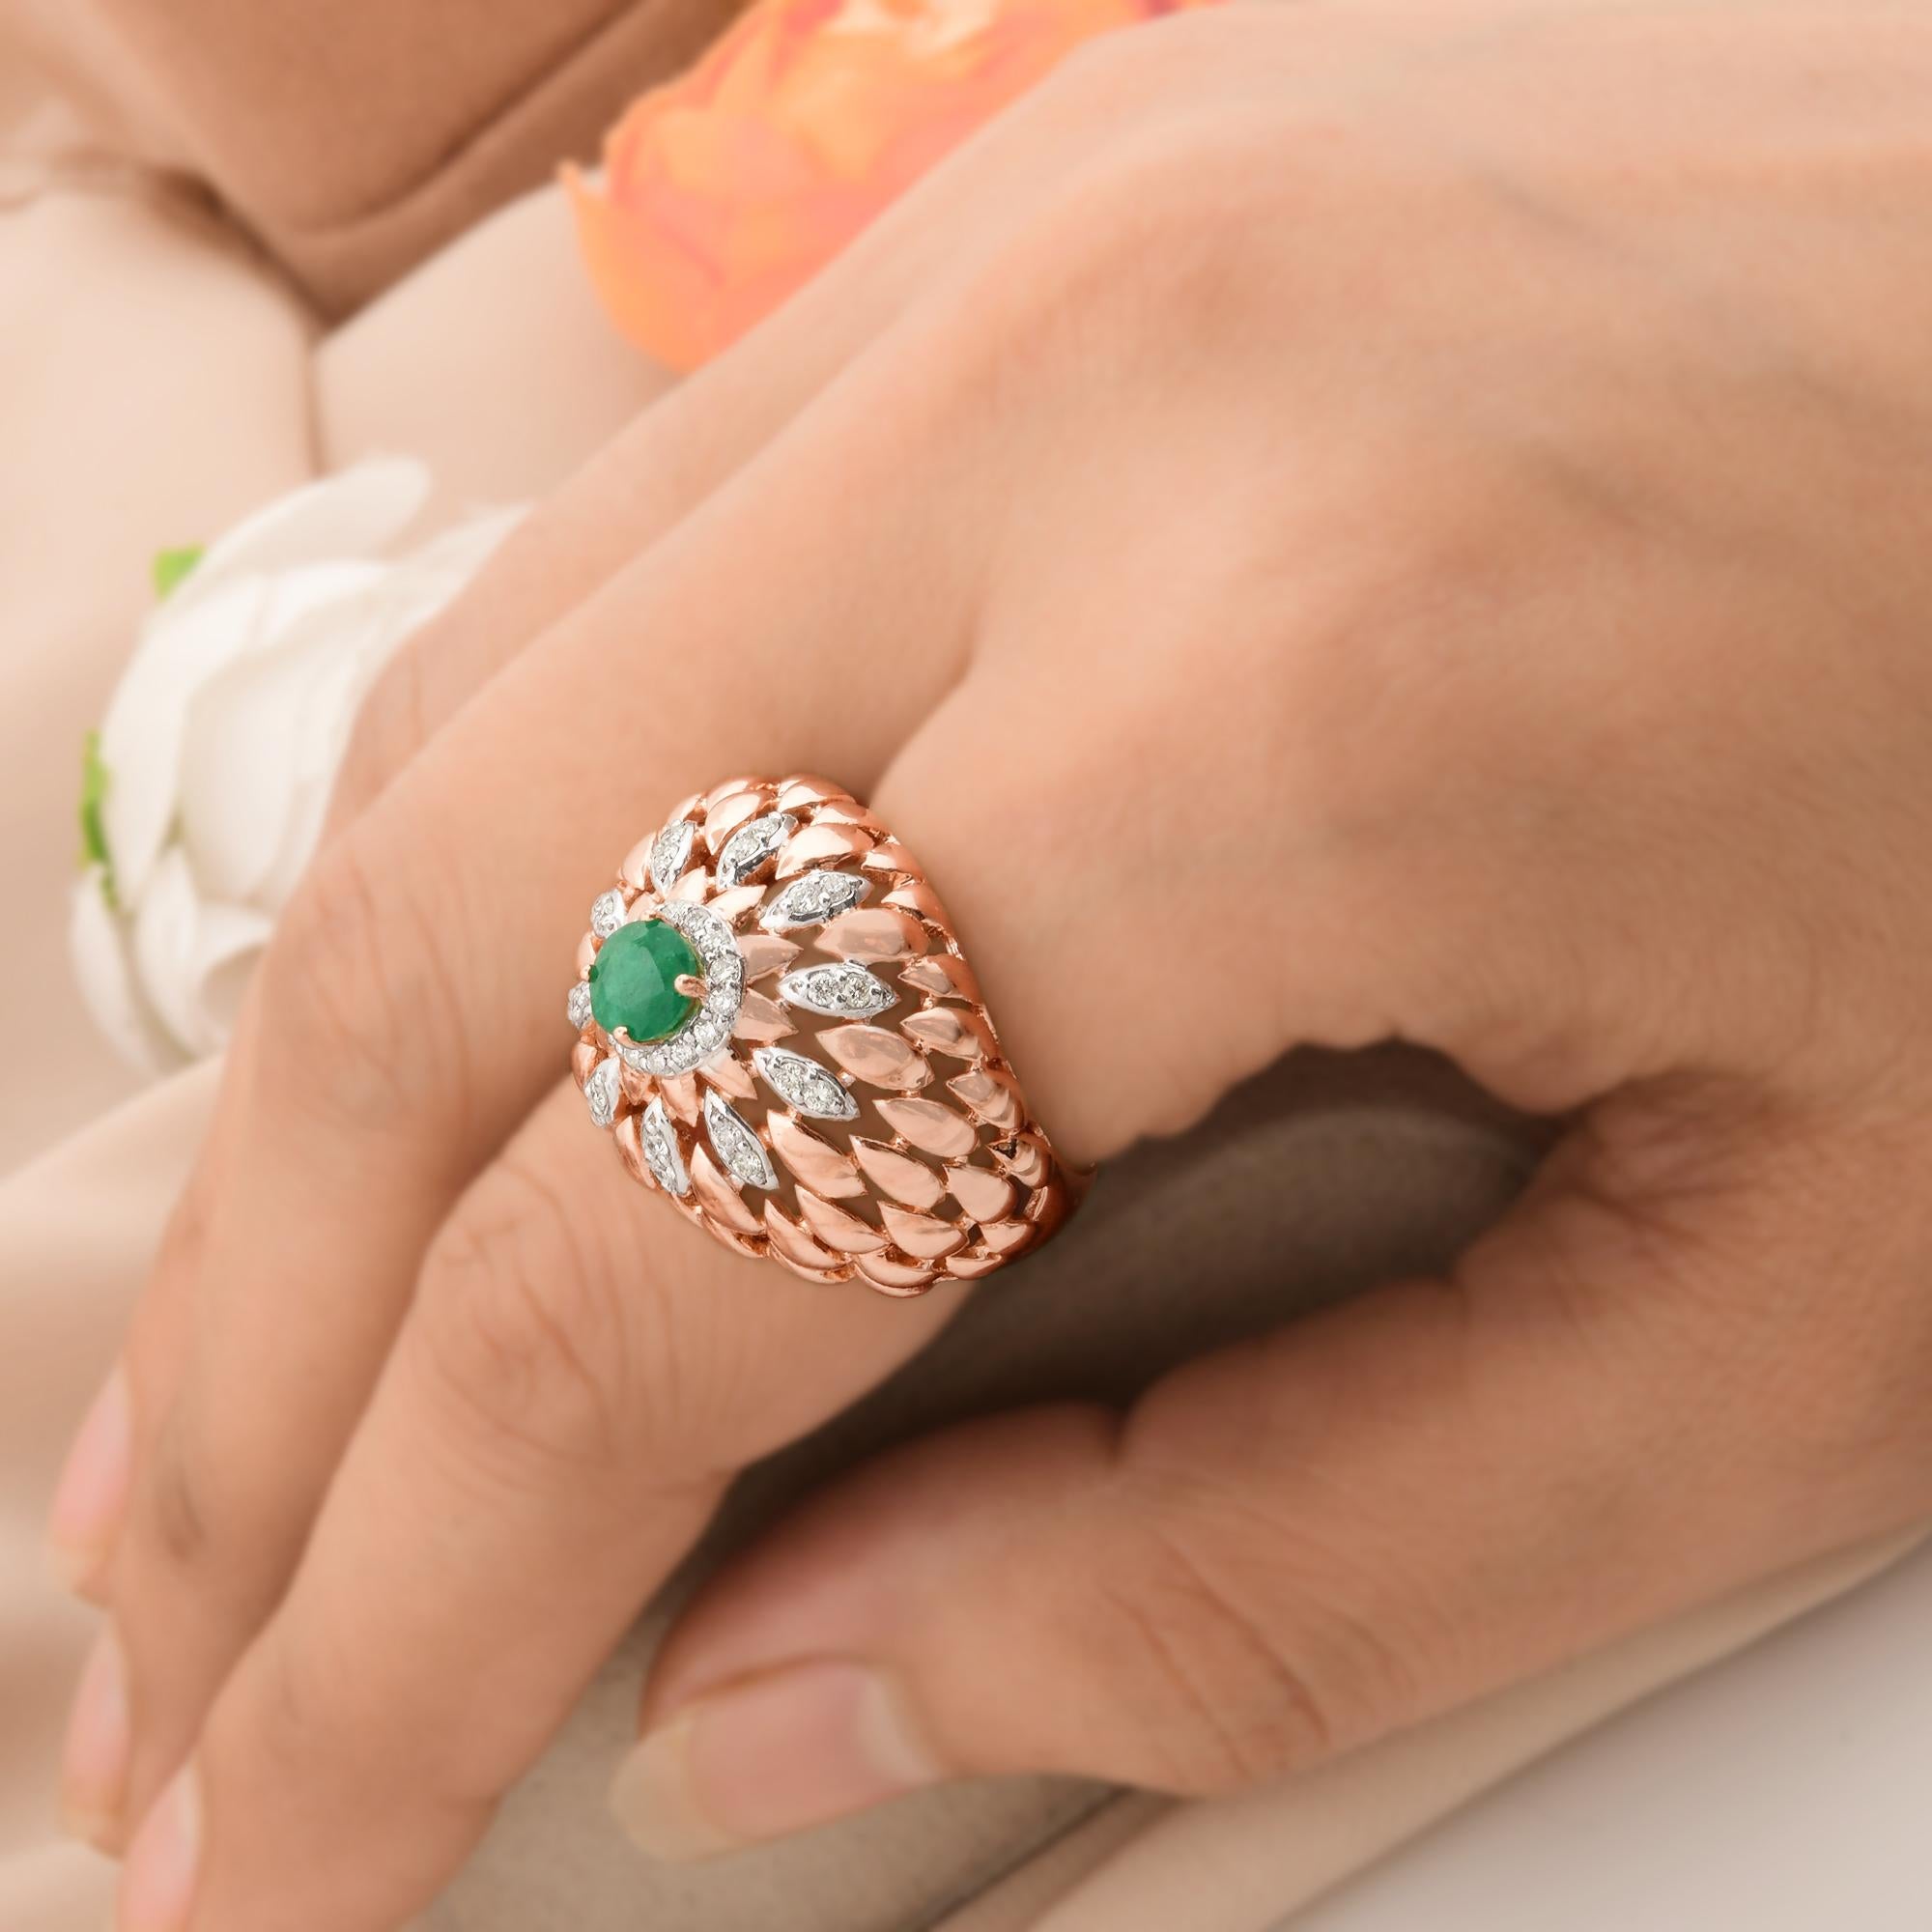 Modern Zambian Emerald Gemstone Dome Ring Diamond Pave Solid 14k Rose Gold Fine Jewelry For Sale